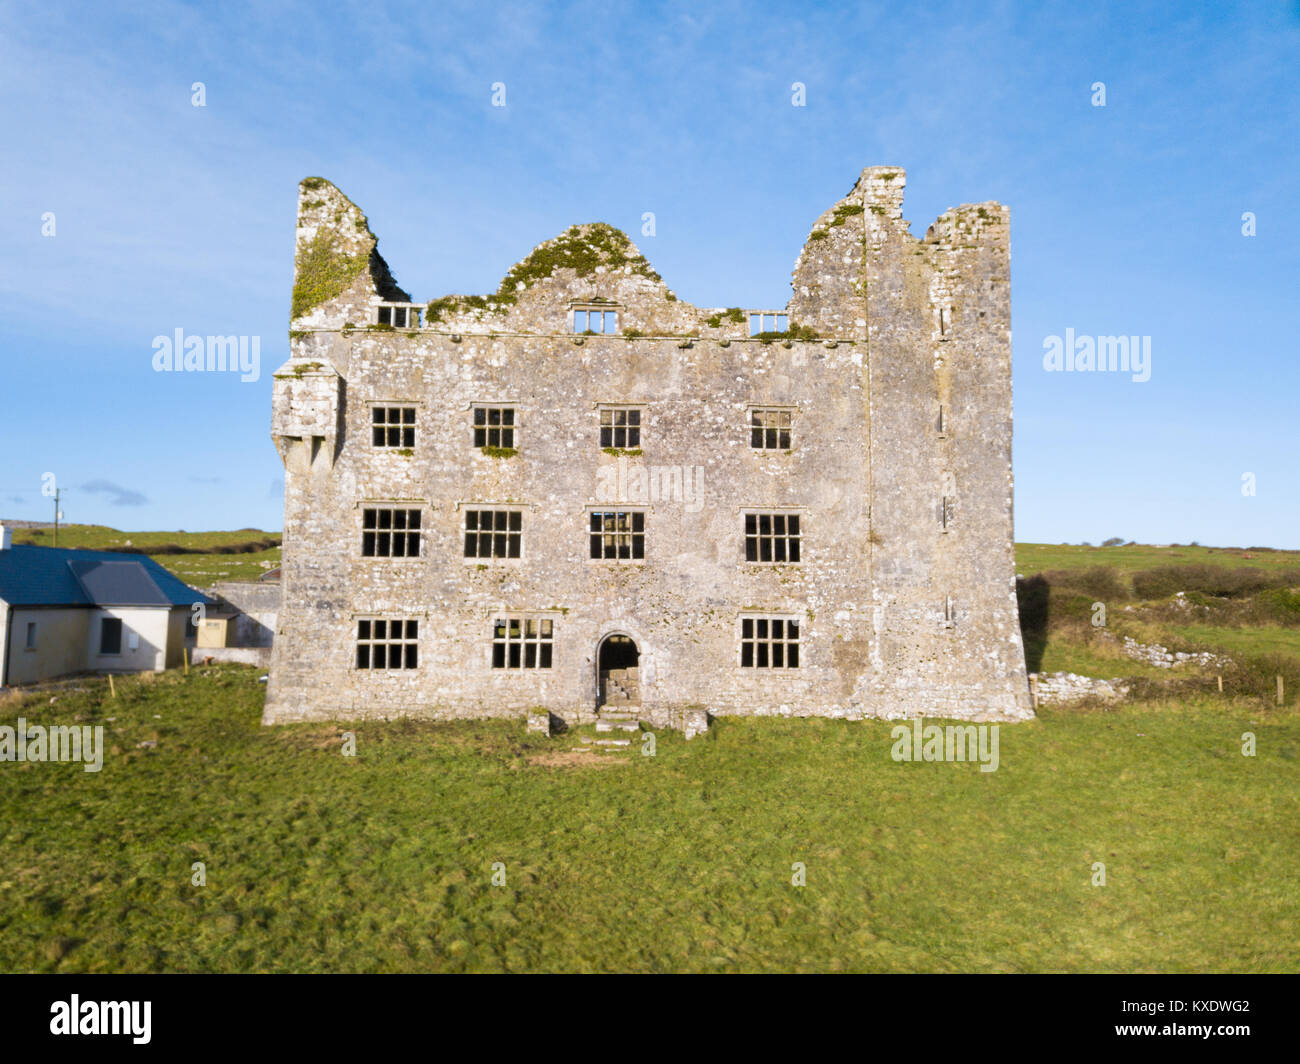 Leamaneh Castle, Leamaneh North, parish of Kilnaboy,  the Burren in County Clare, Republic of Ireland Stock Photo